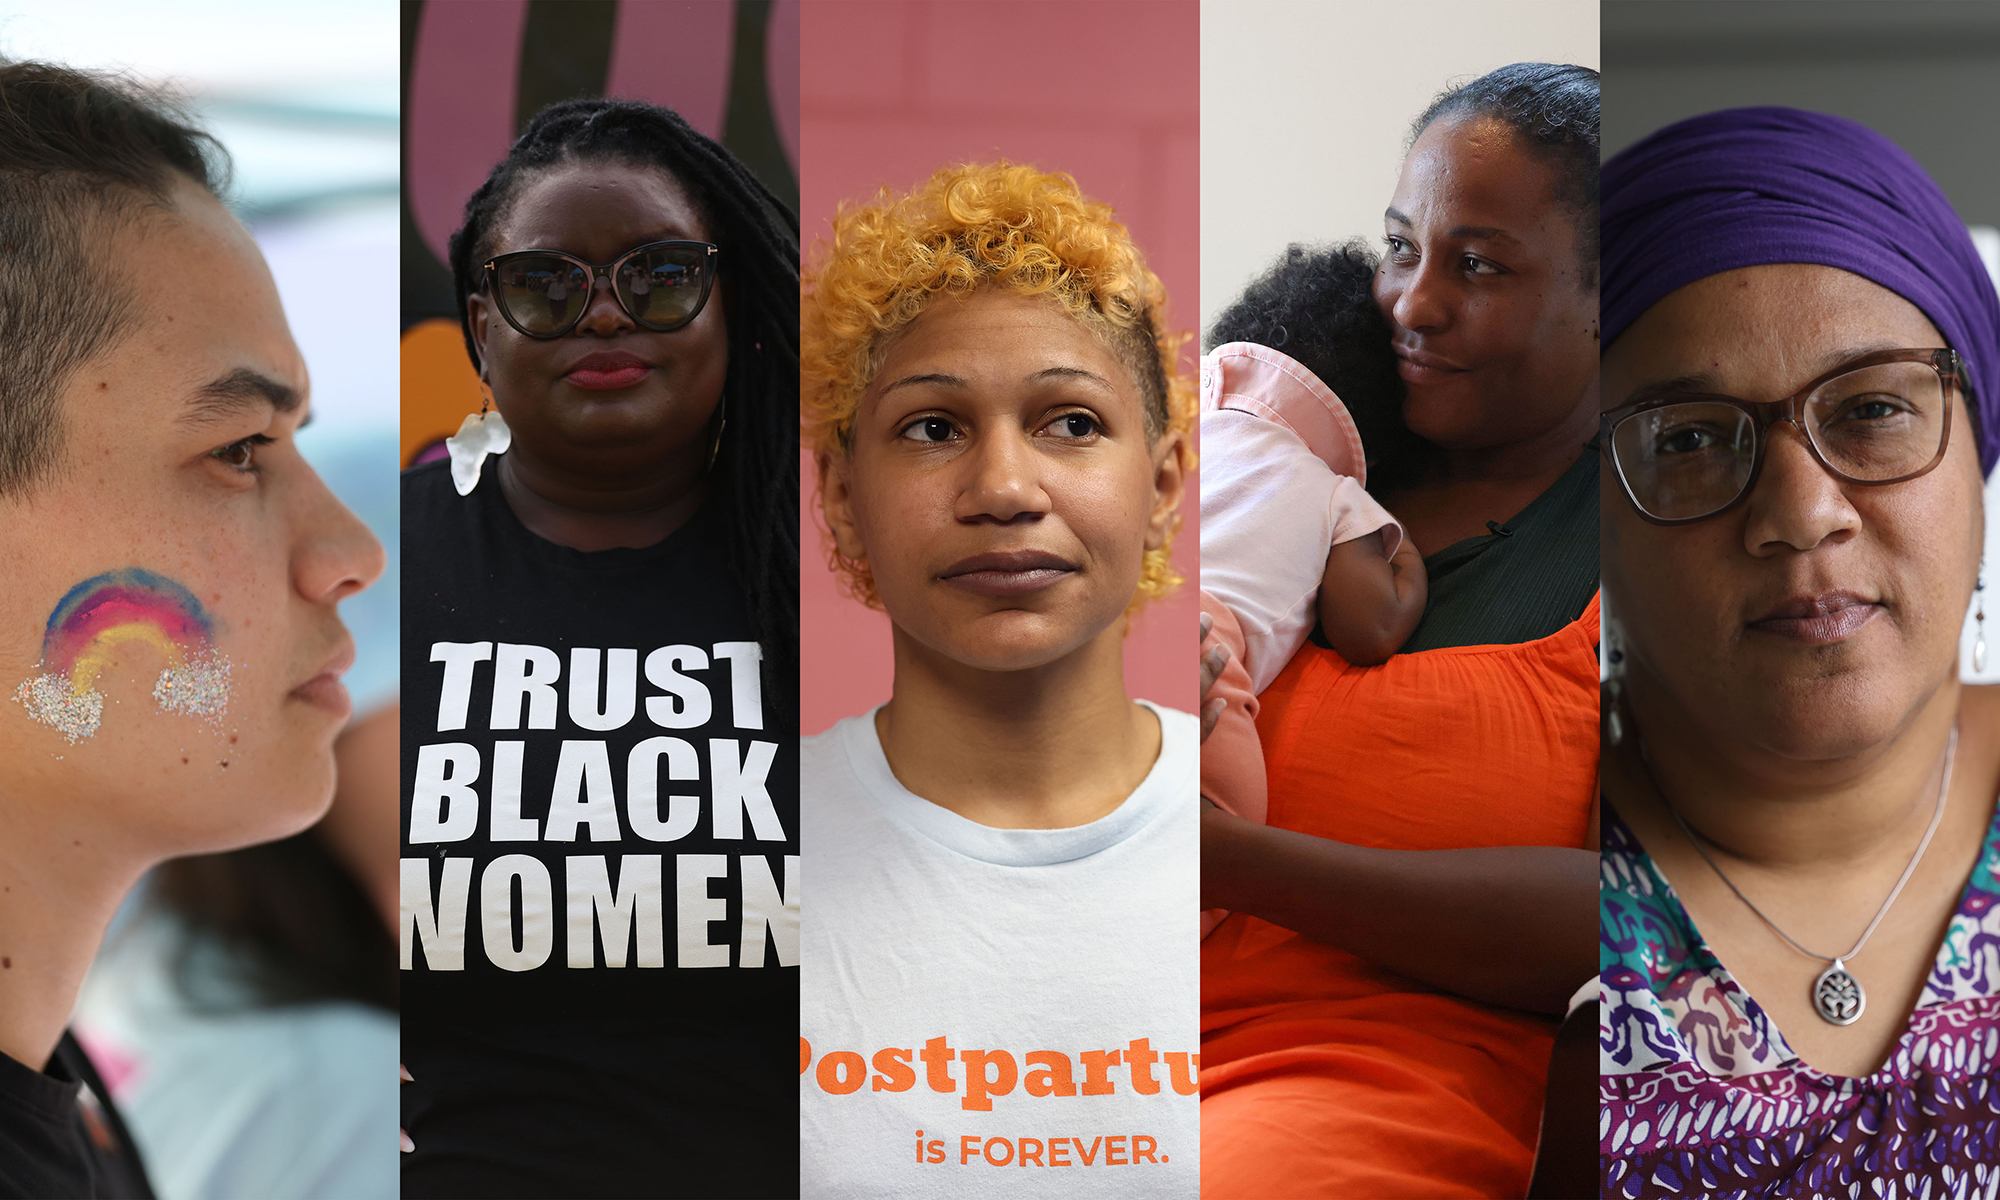 In the South, grassroots activists are working to combat maternal mortality rates. Among them, from left, are: Maya Hart and Monica Simpson of SisterSong; Iesha Lynch, a birth, death and postpartum doula; Maya Jackson, founder of MAAME; and Tina Braimah, a midwife and owner of Sankofa Birth and Women’s Care. (Photos by Shelby Rae Wills/News21)